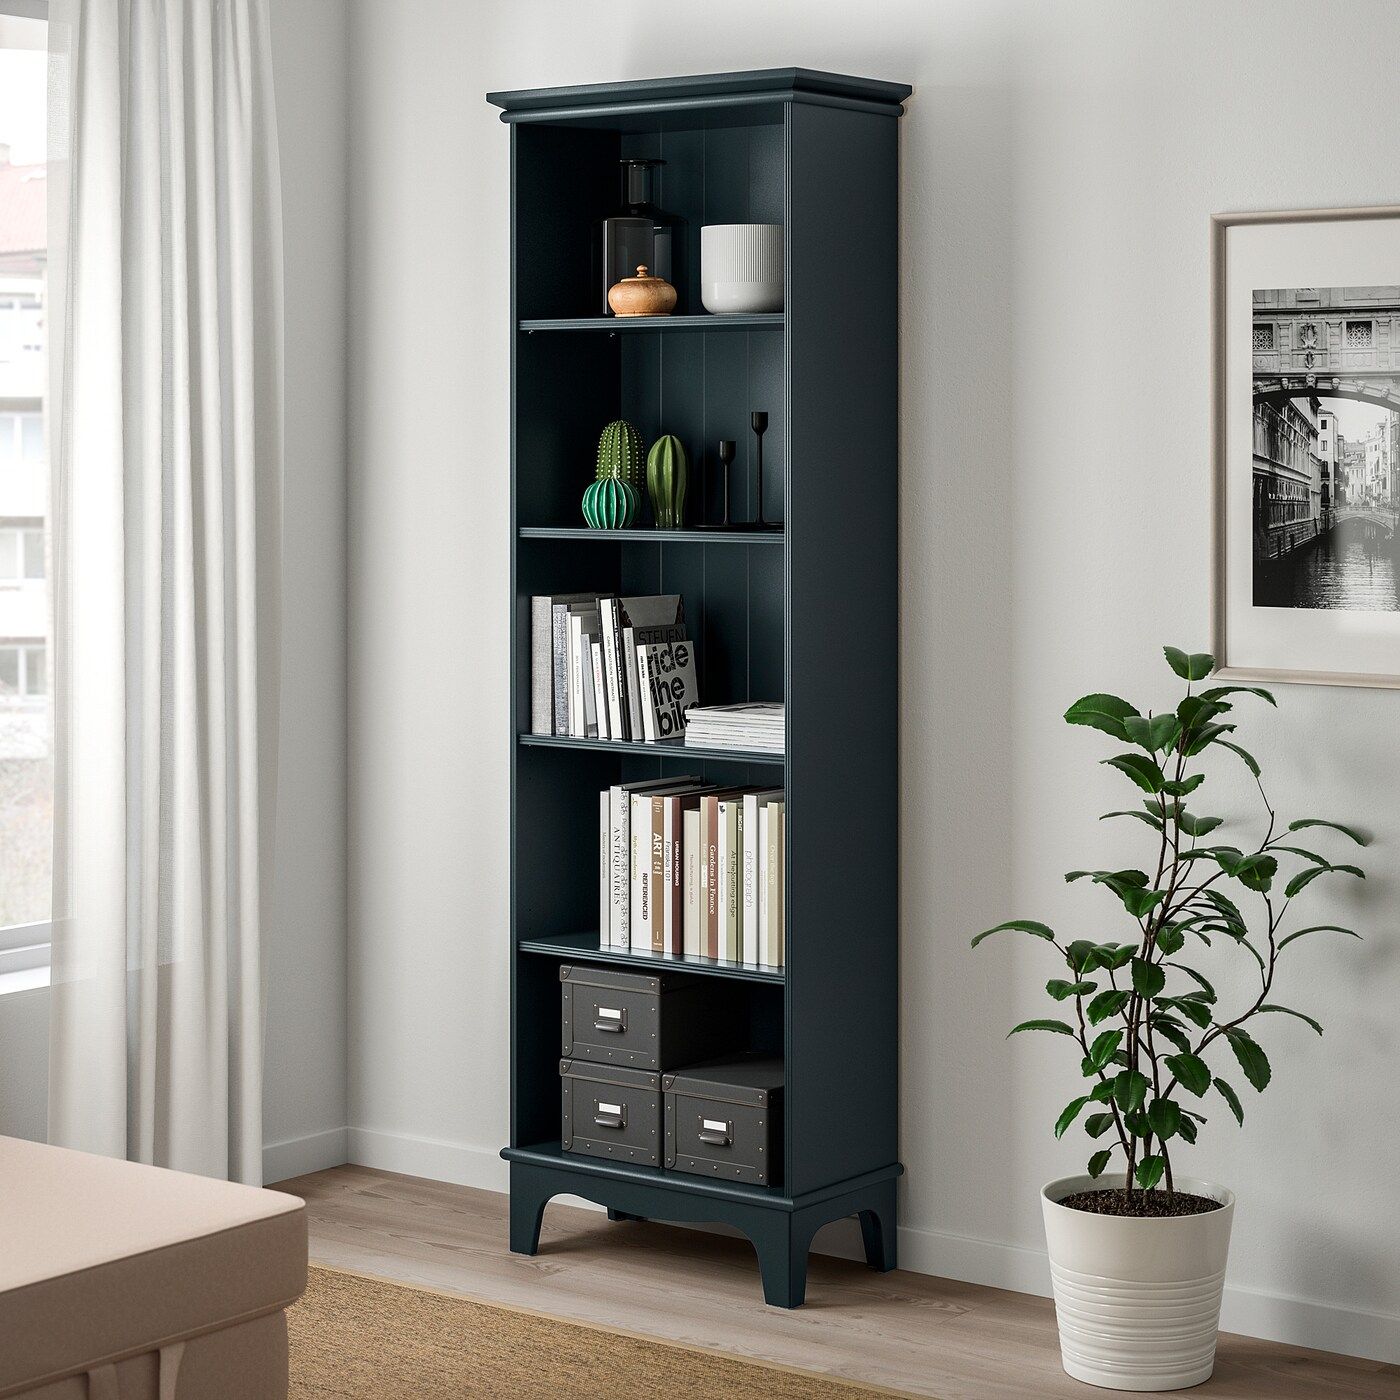 Lommarp Dark Blue Green, Bookcase, 65x199 Cm – Ikea Inside Blue Wood Bookcases (View 1 of 15)